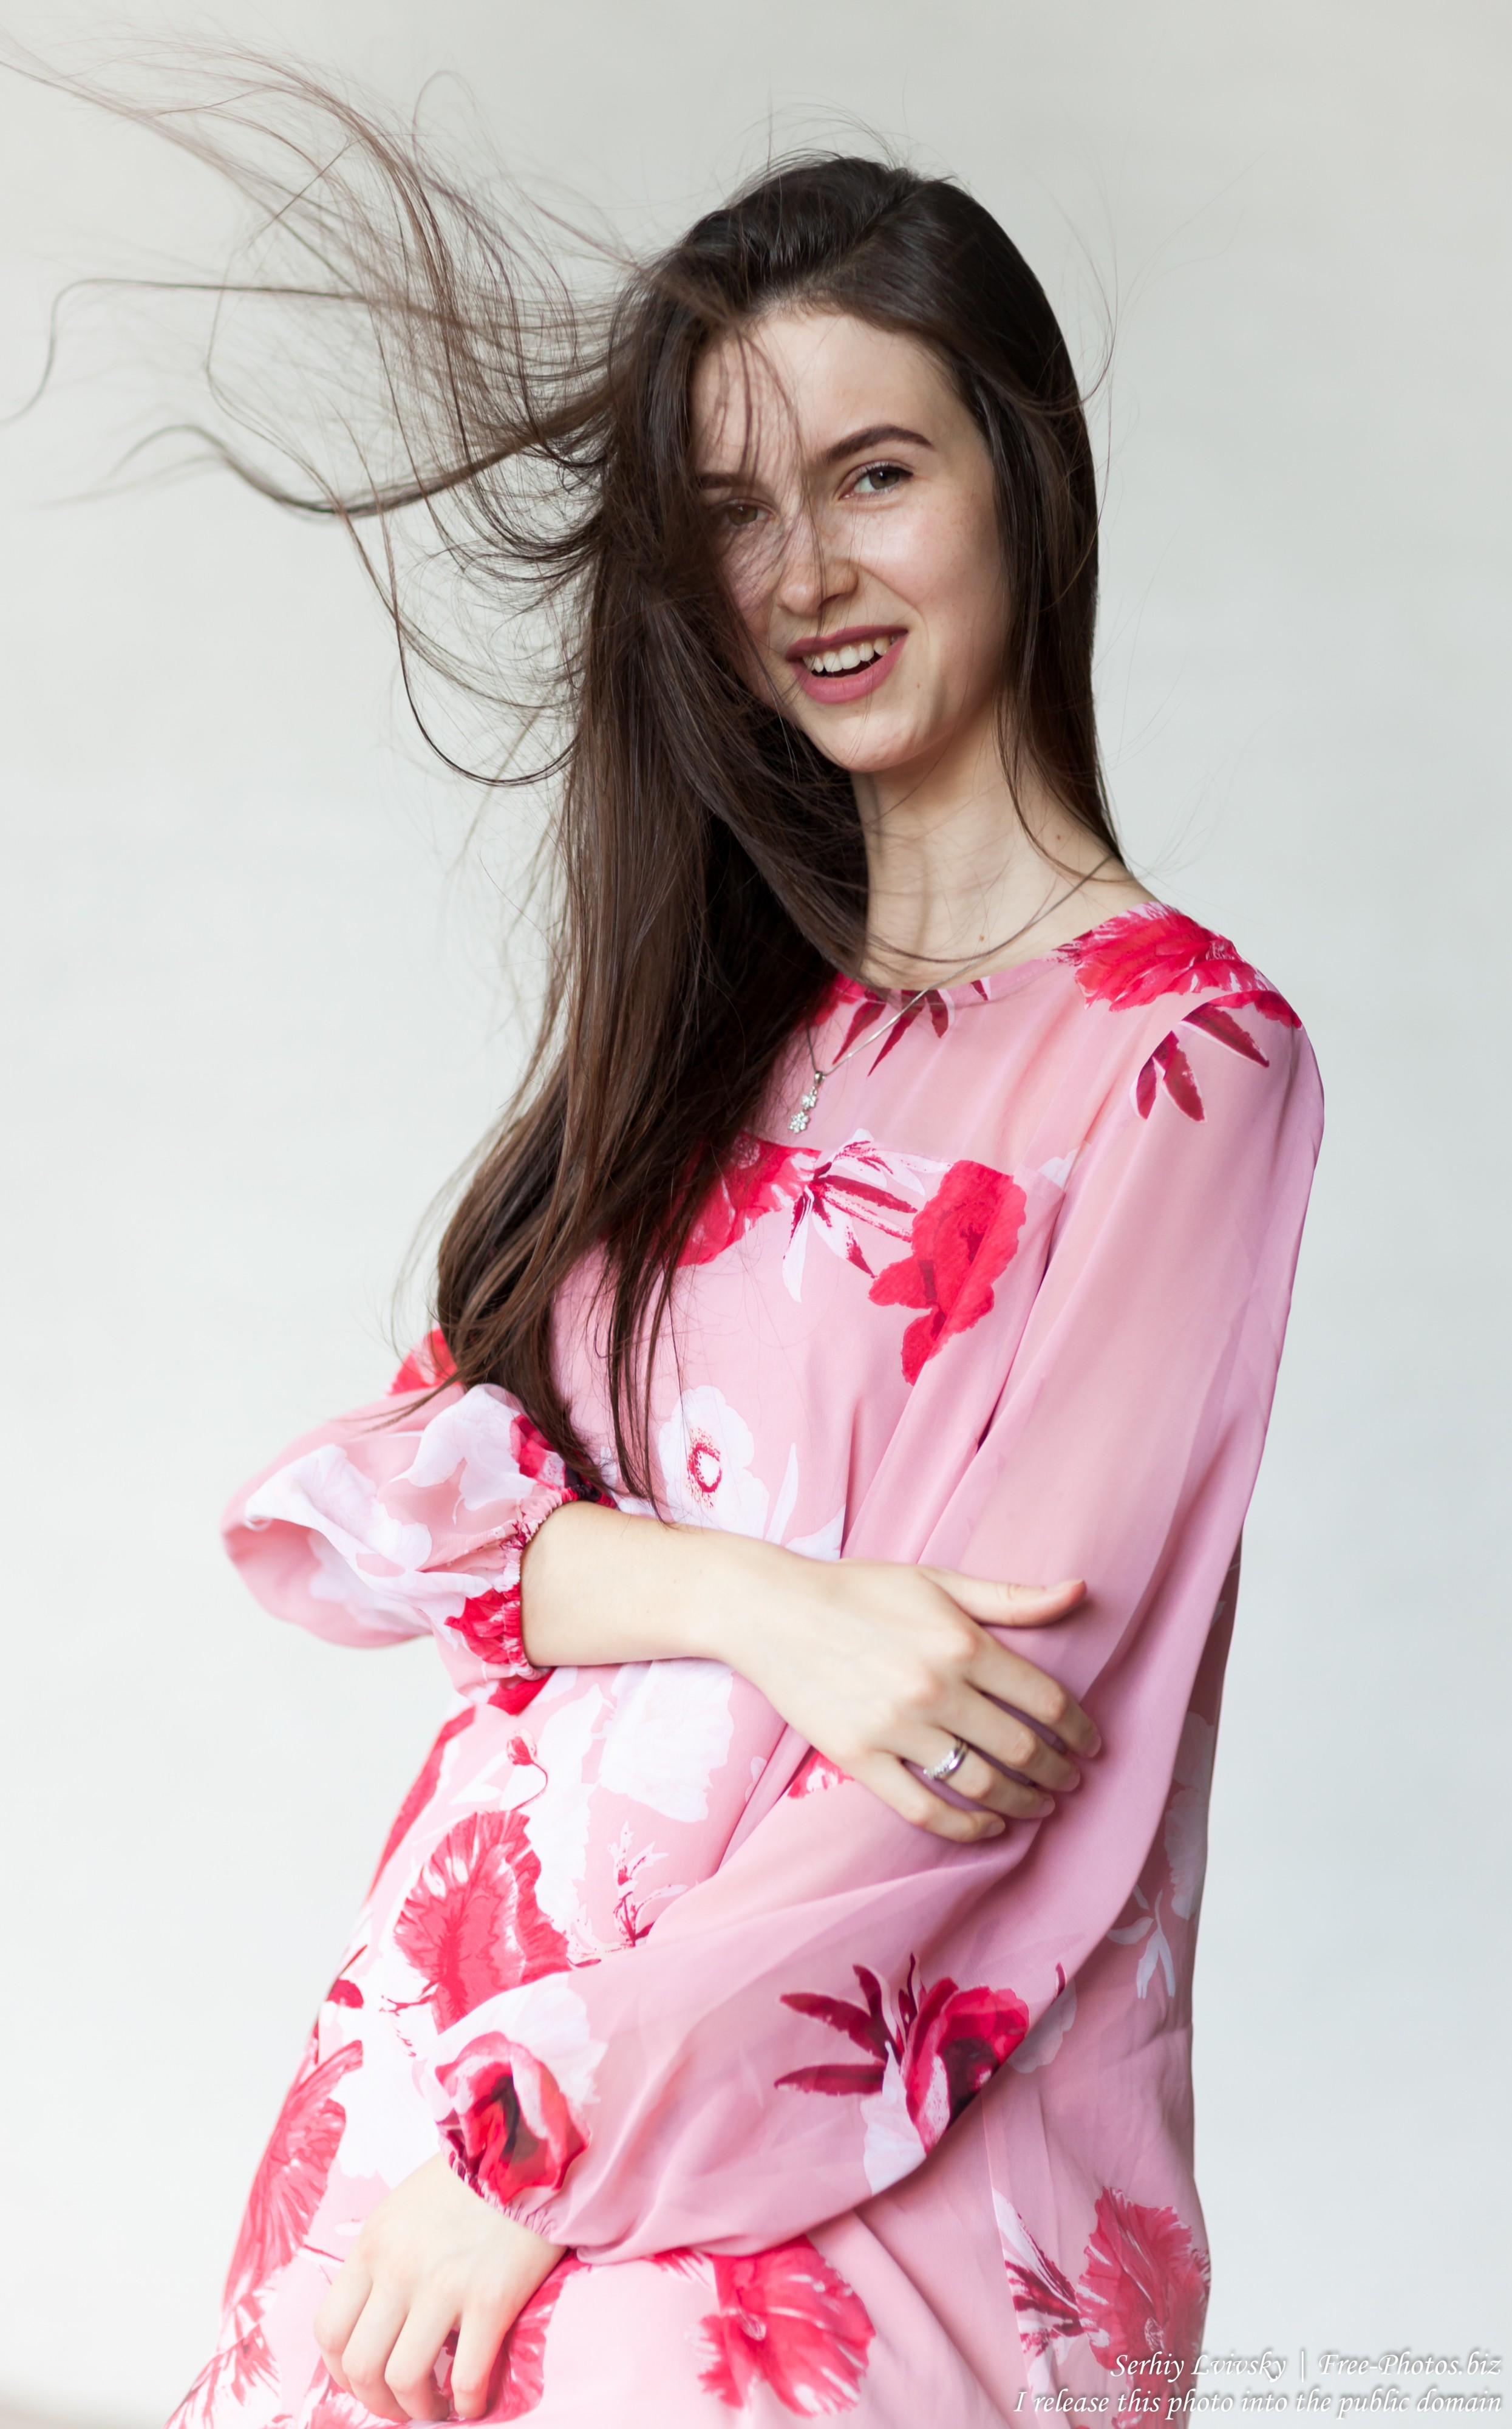 Photo Of Vika A Year Old Brunette Woman Photographed By Serhiy